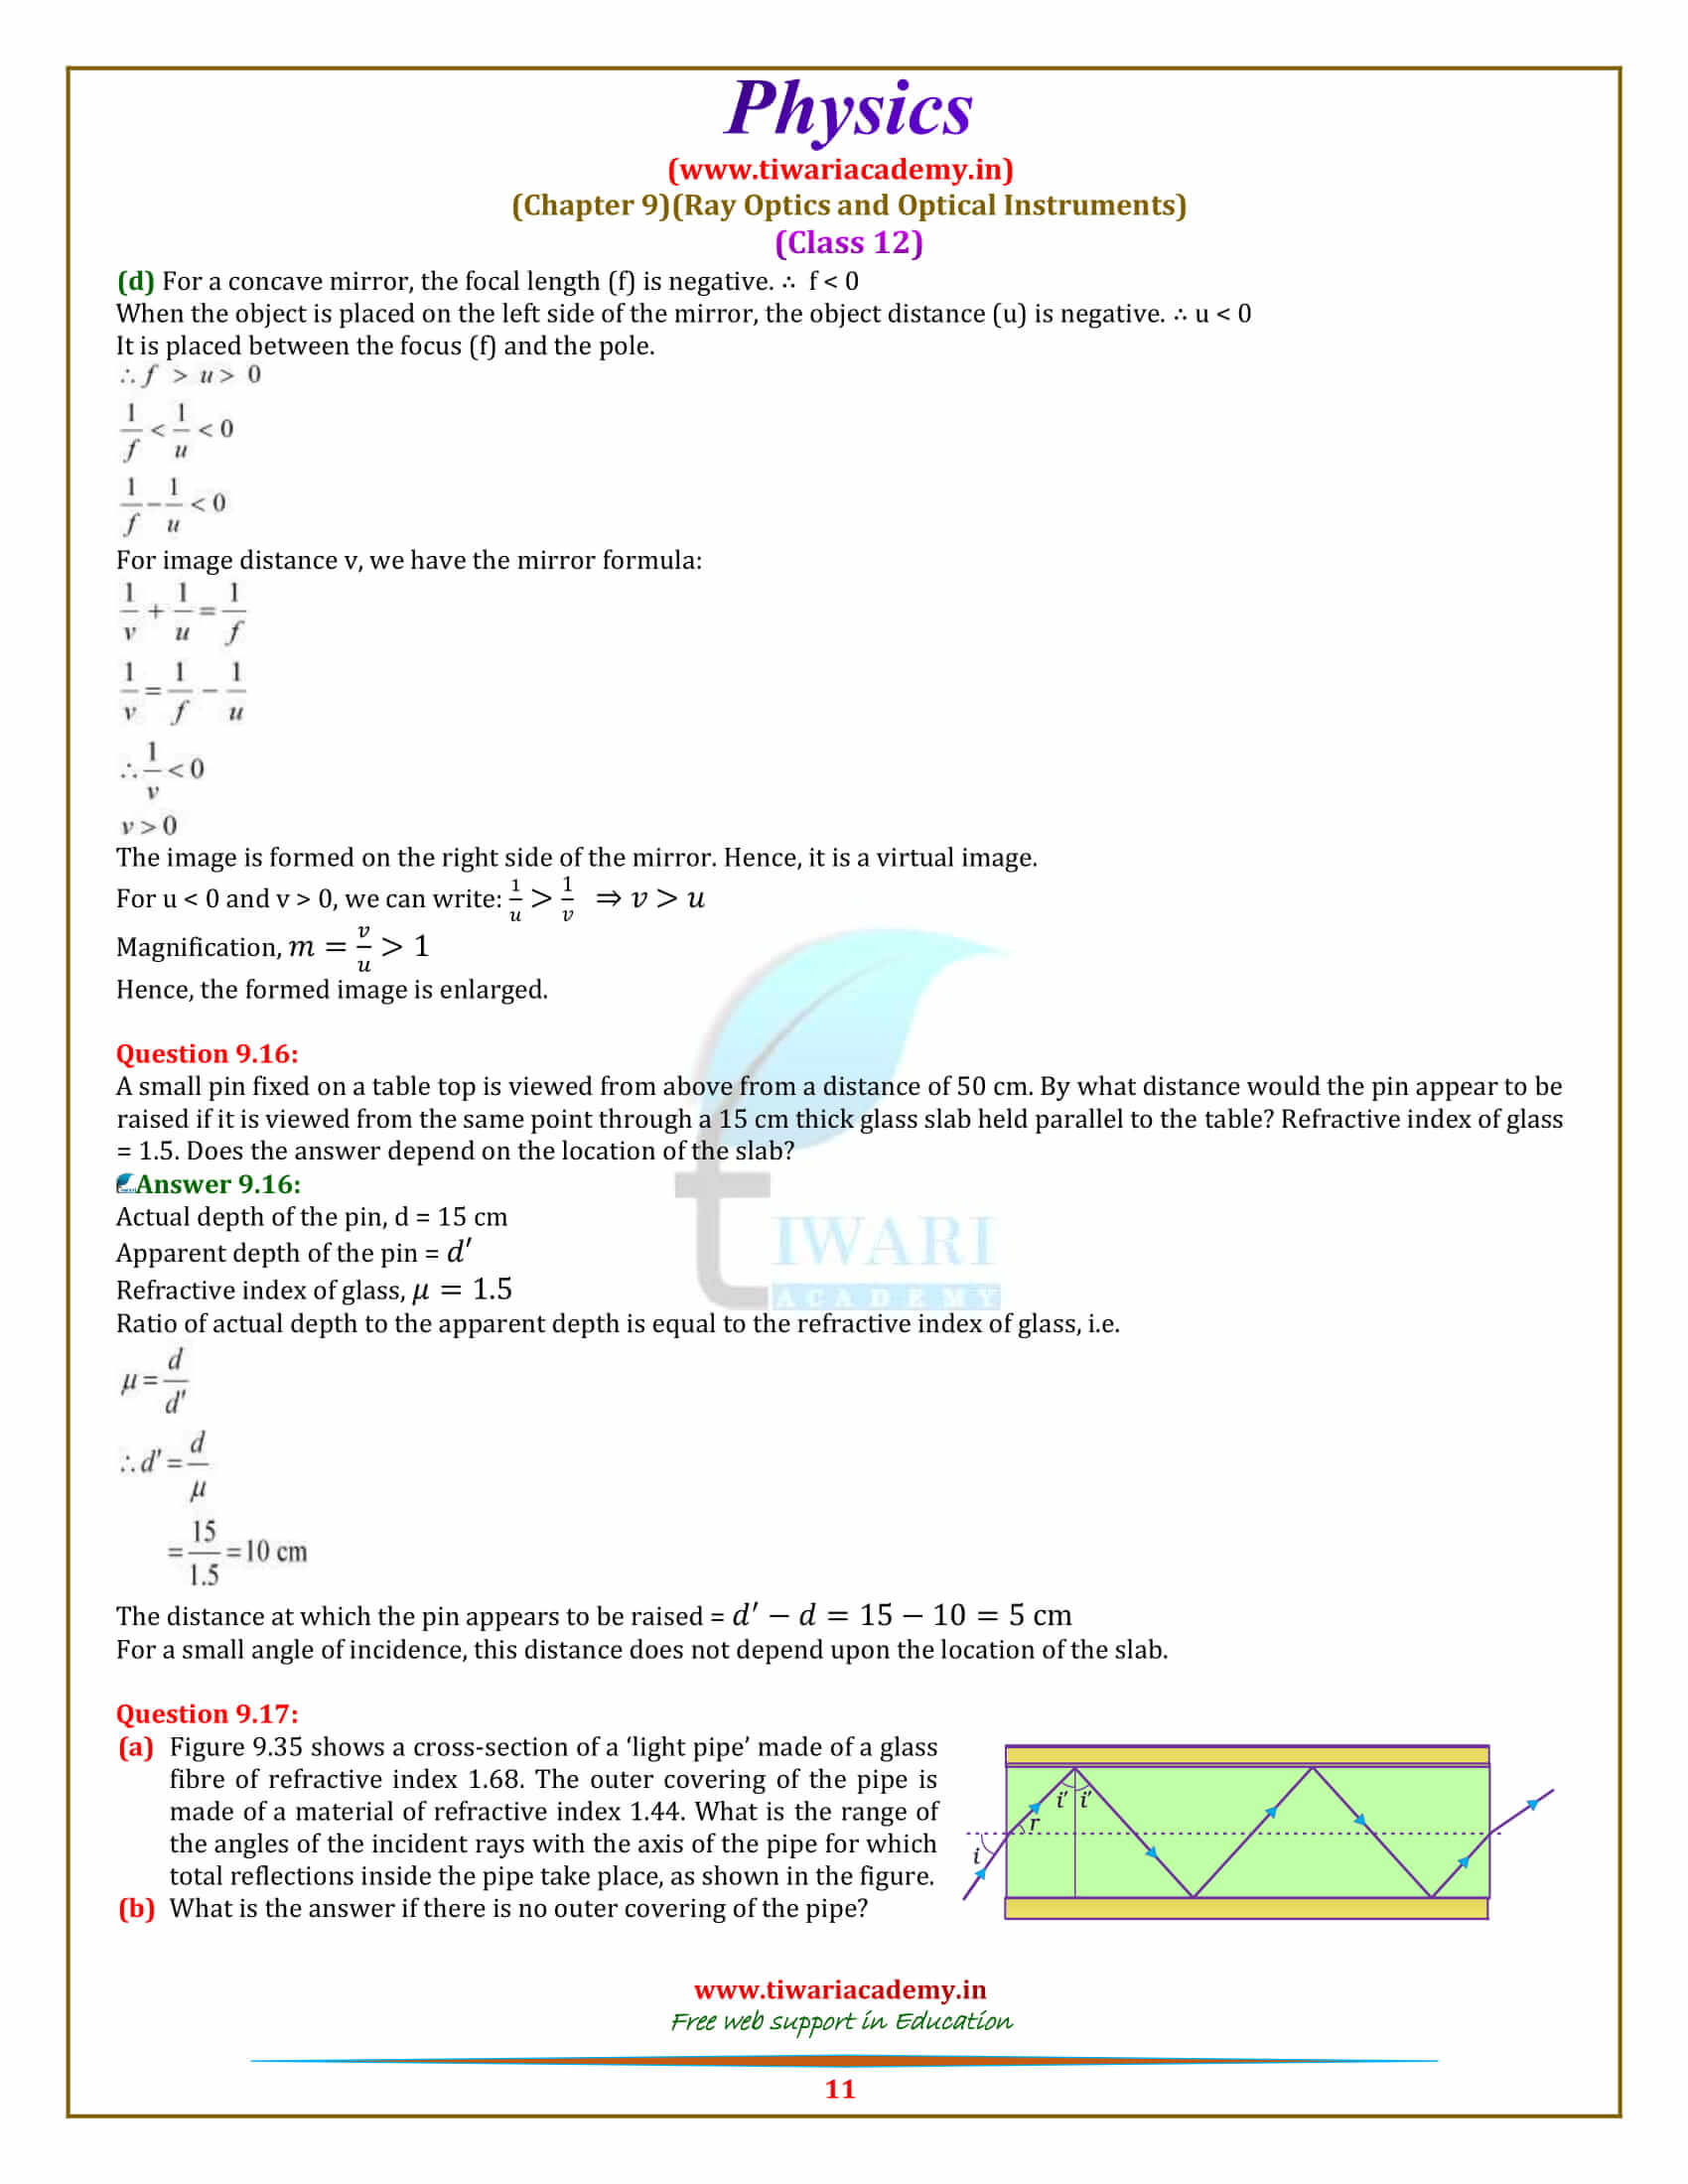 NCERT Solutions for Class 12 Physics Chapter 9 question 1 to 17